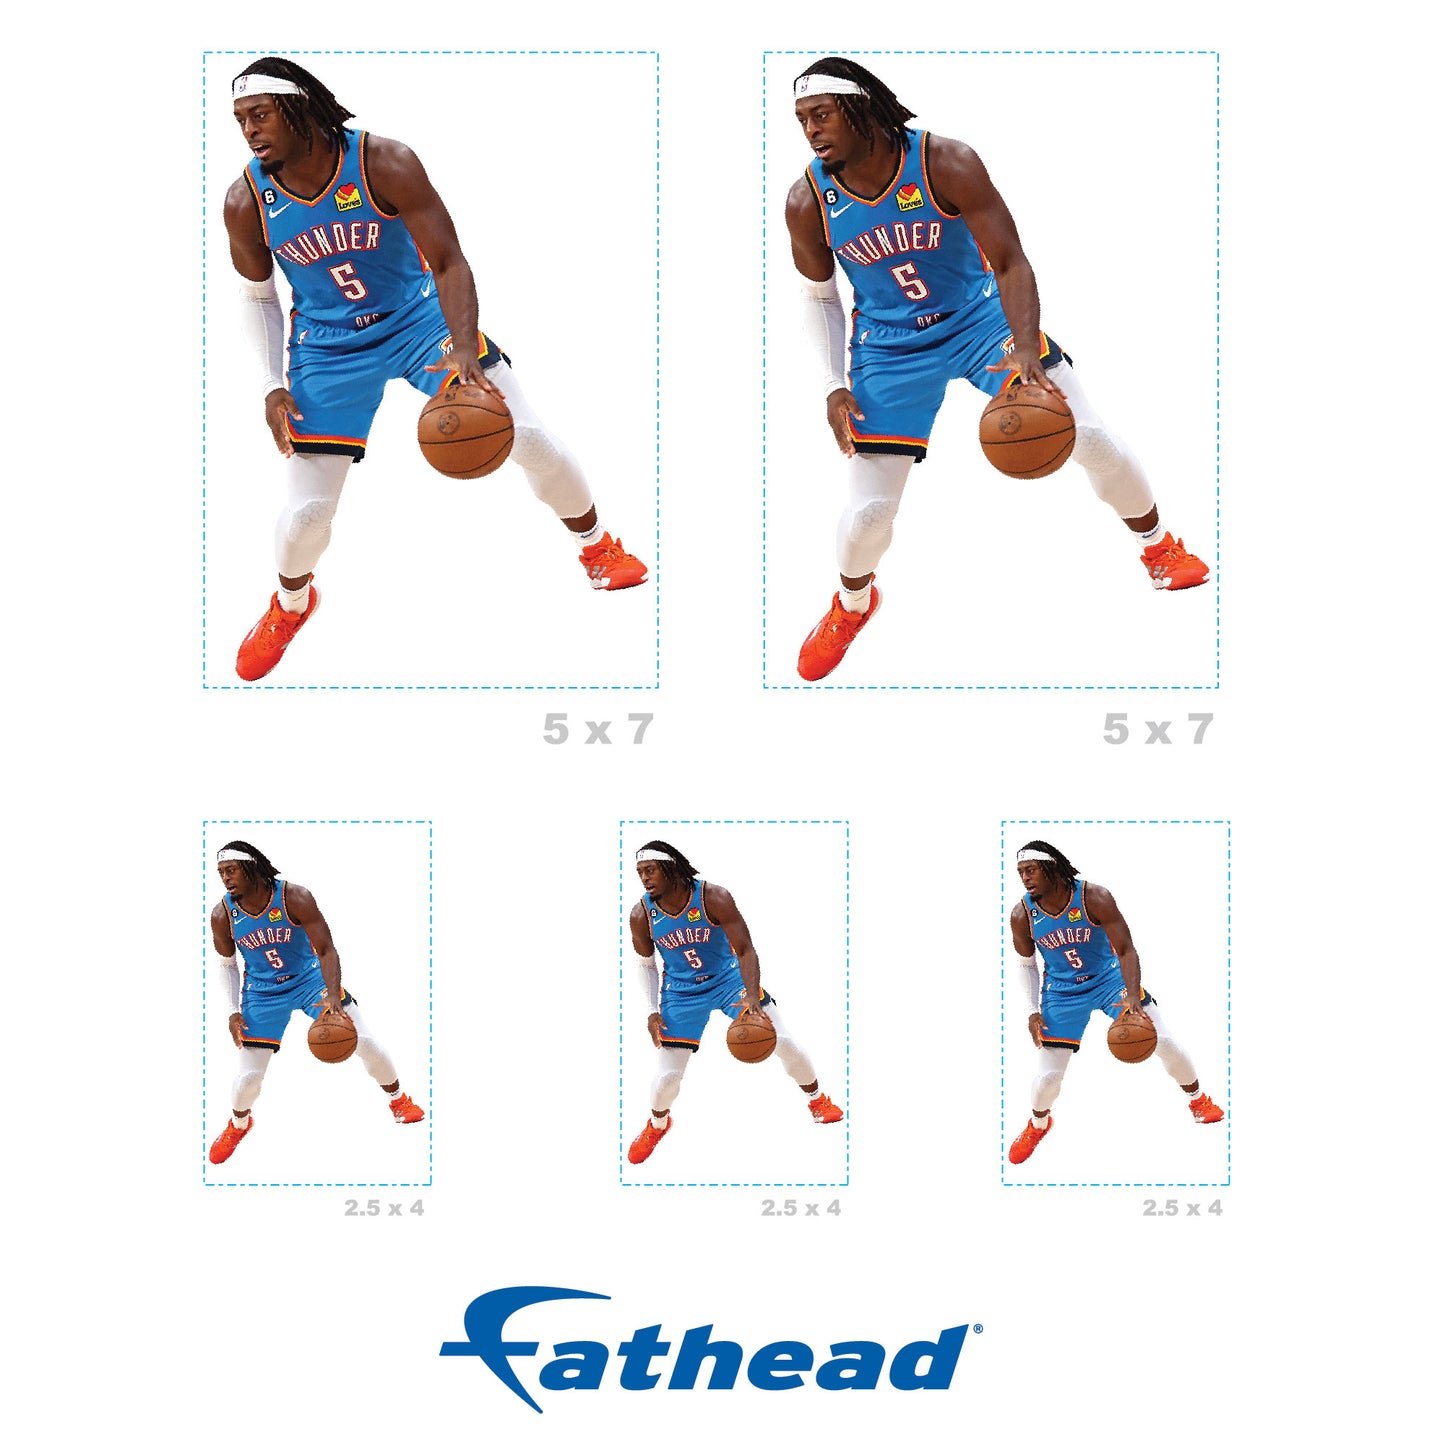 Oklahoma City Thunder: Luguentz Dort Minis - Officially Licensed NBA Removable Adhesive Decal